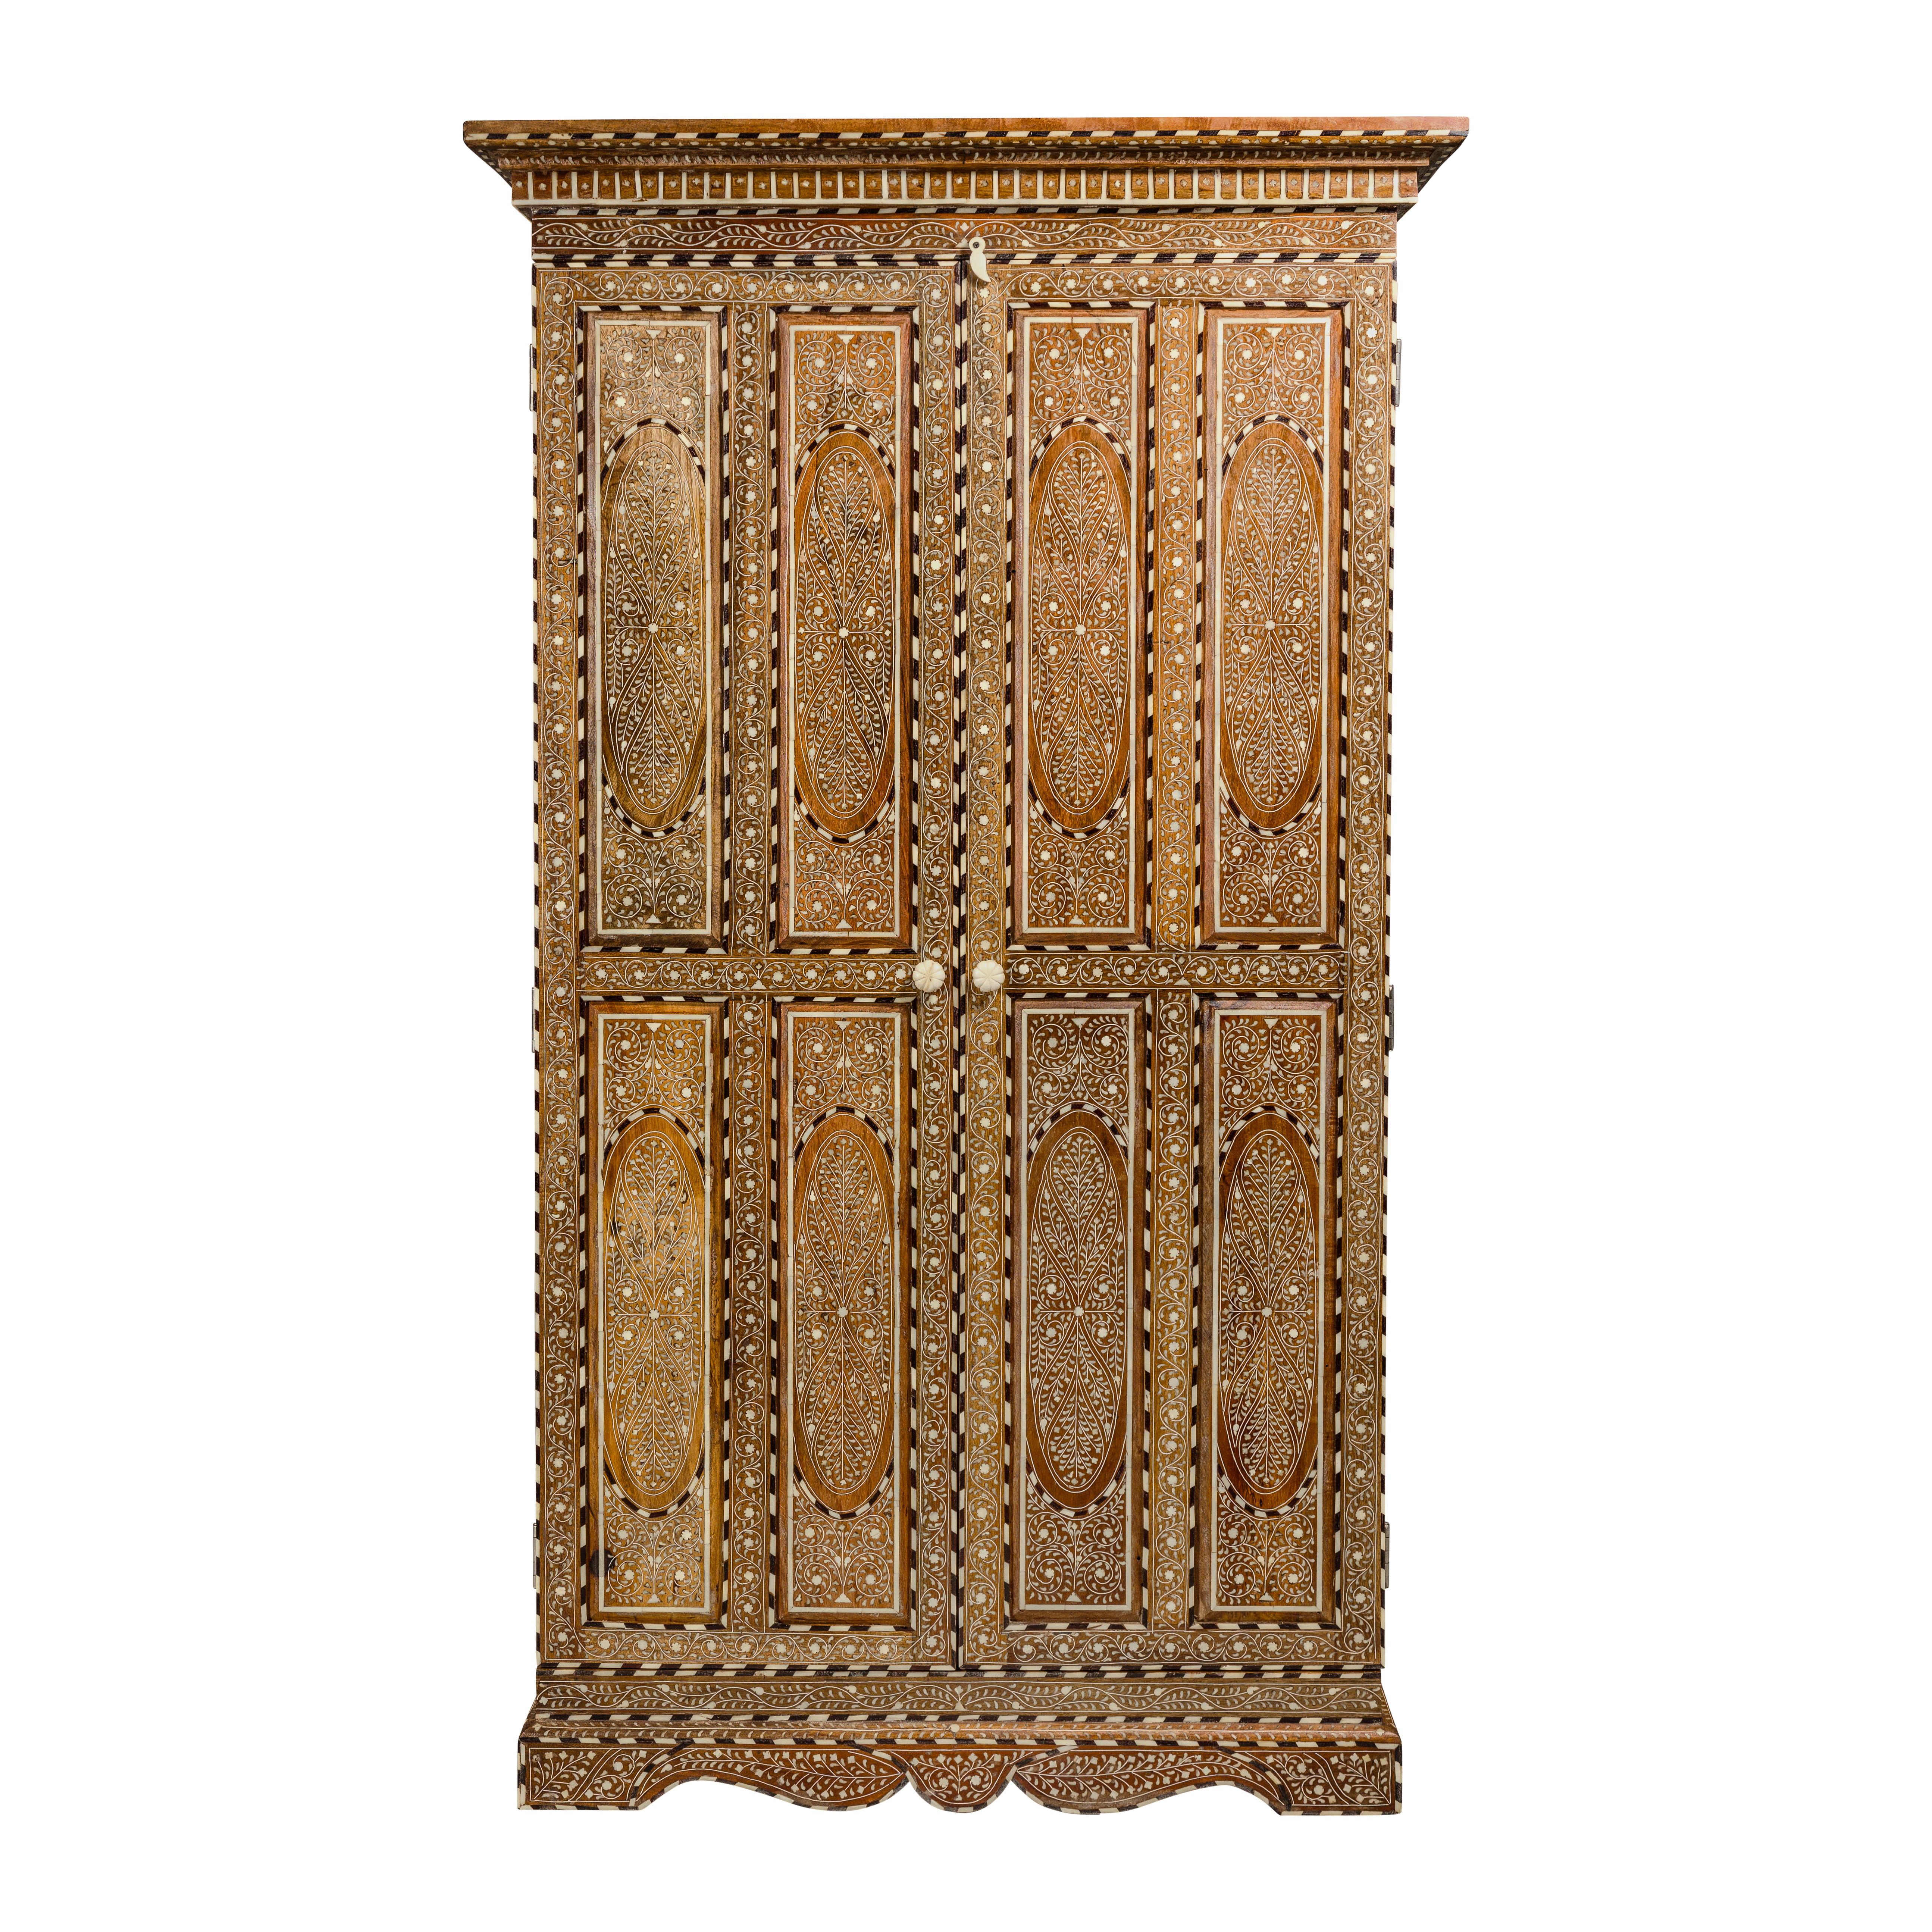 An Anglo-Indian style inlaid mango wood wardrobe cabinet from the mid-20th century, with floral themed bone inlay. This mid-20th-century Anglo-Indian style wardrobe cabinet is a true masterpiece of craftsmanship and design. Its enchanting presence